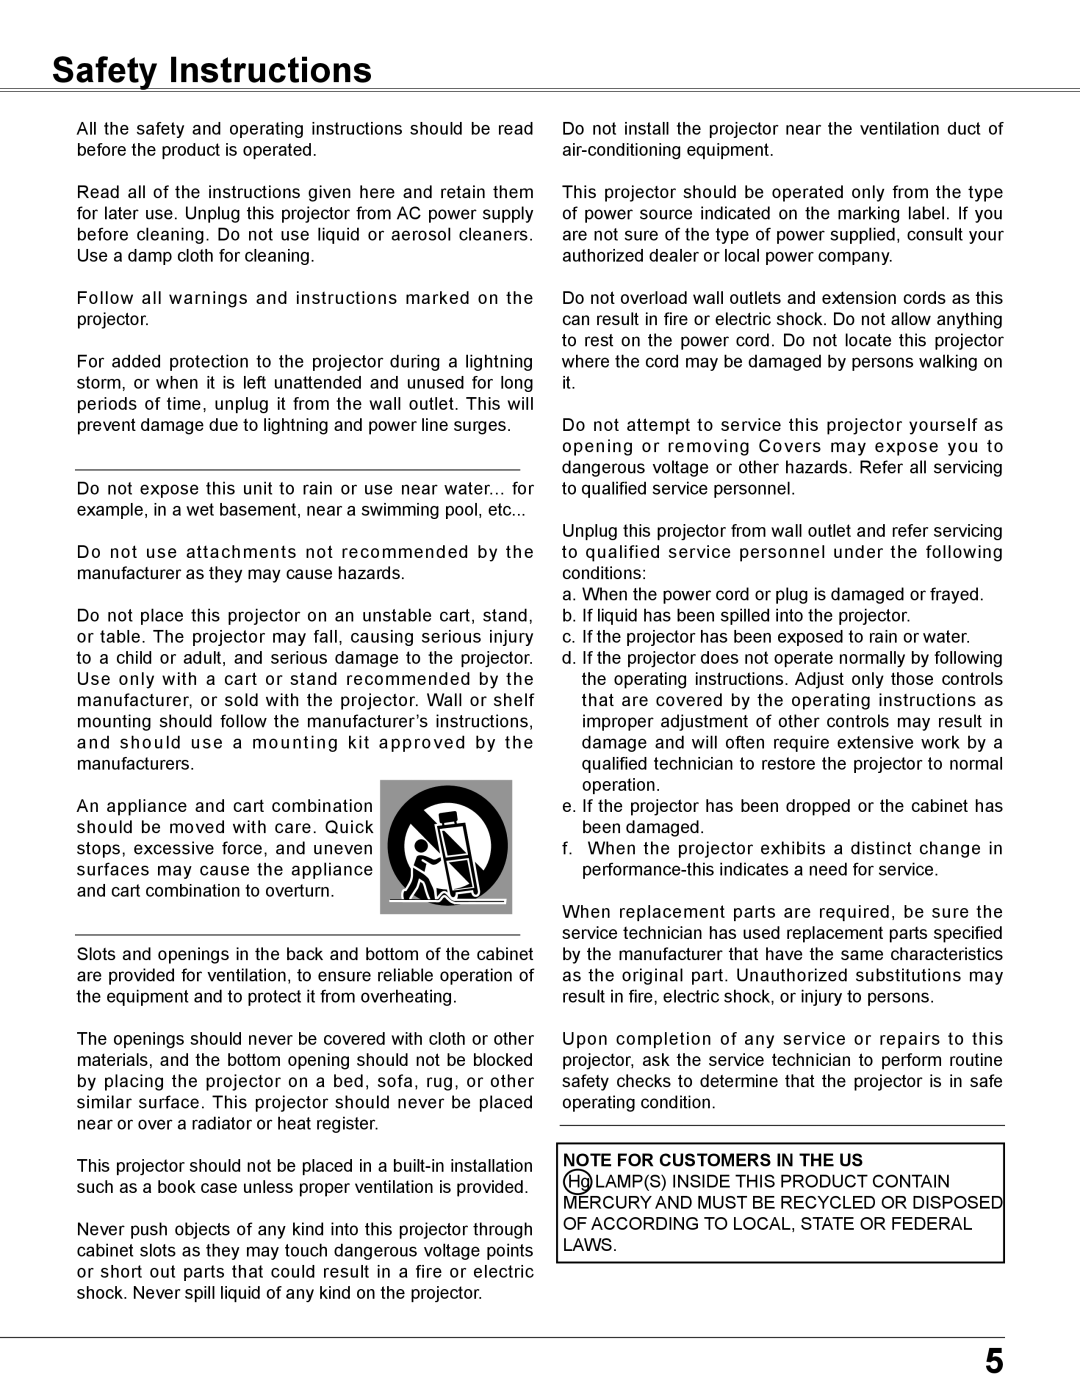 Elmo CRP-26 owner manual Safety Instructions, Note For Customers In The Us 